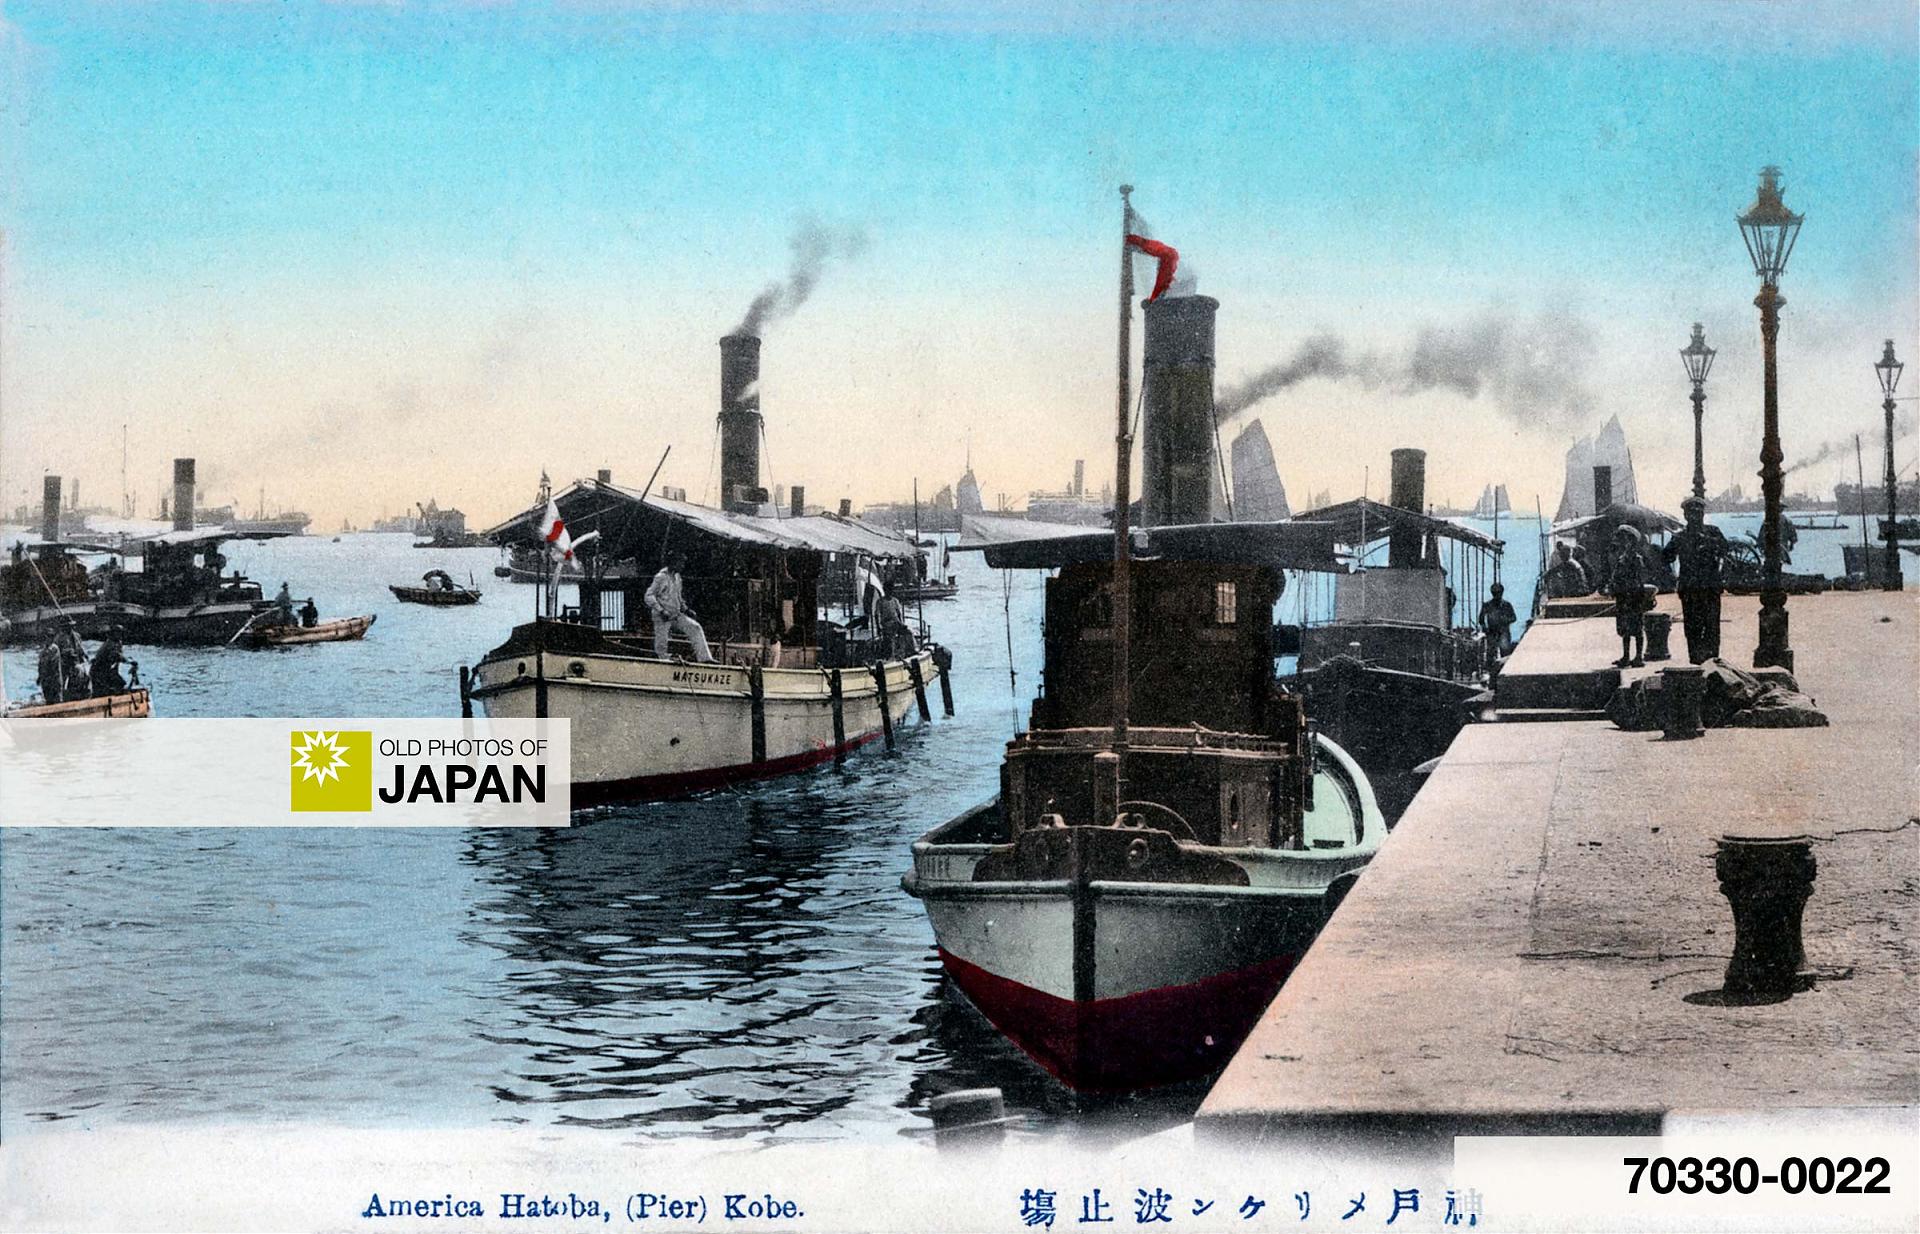 70330-0022 - Steam launches at American Hatoba in Kobe, 1910s